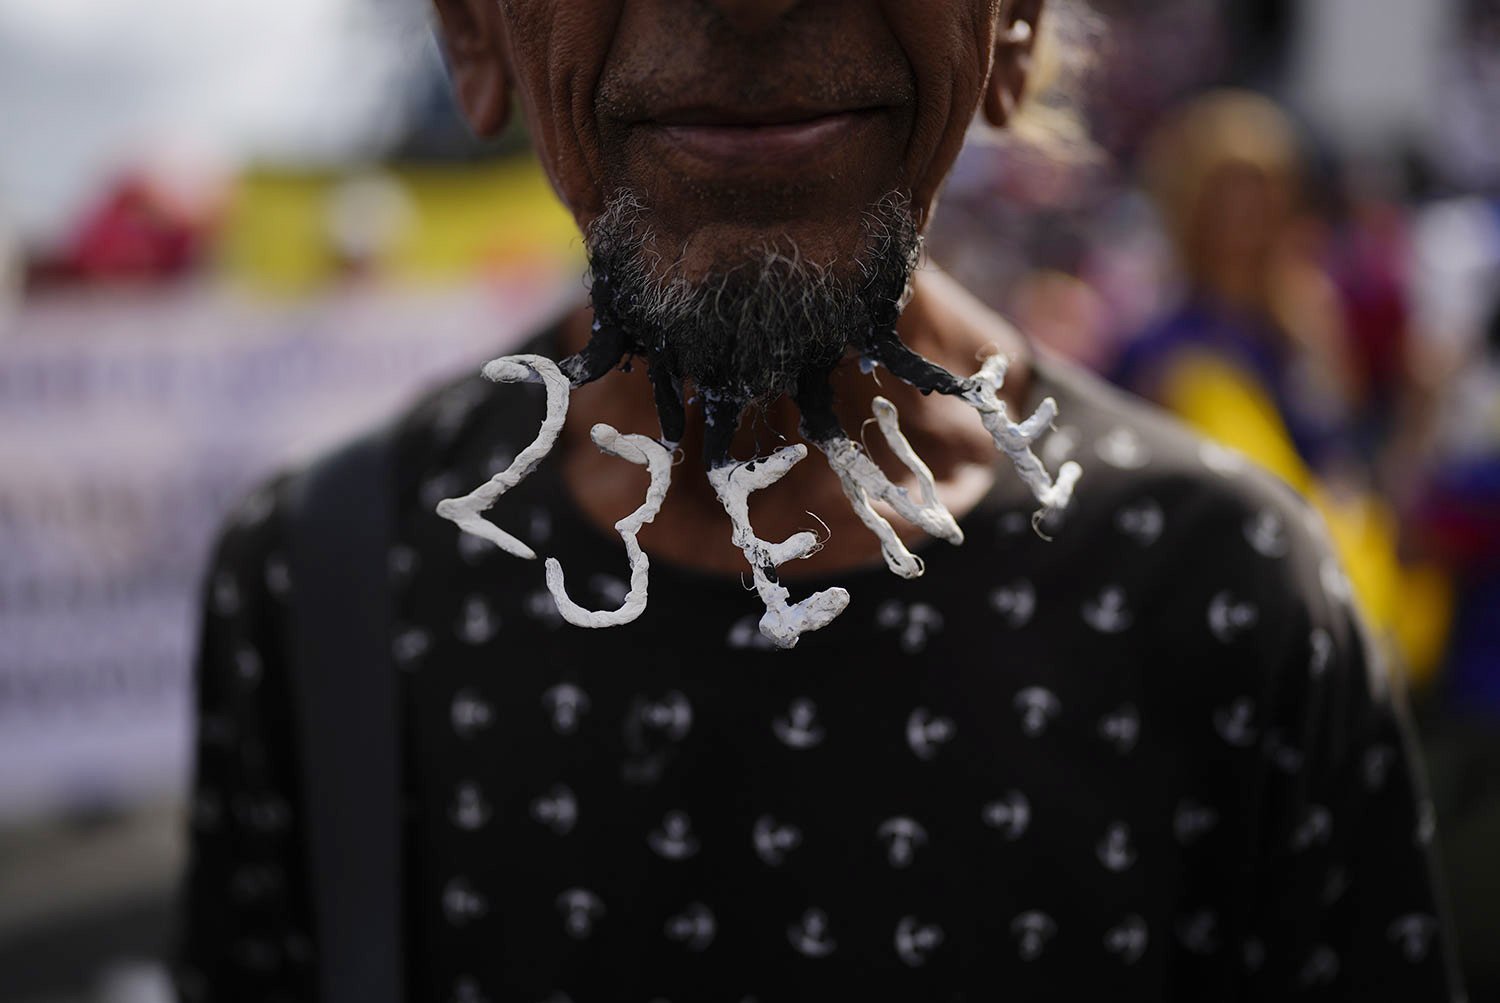  A demonstrator wears the date Jan. 23 woven into his beard at an event marking the anniversary of the 1958 coup that overthrew dictator Marcos Perez Jimenez in Caracas, Venezuela, Jan. 23, 2023. (AP Photo/Ariana Cubillos) 